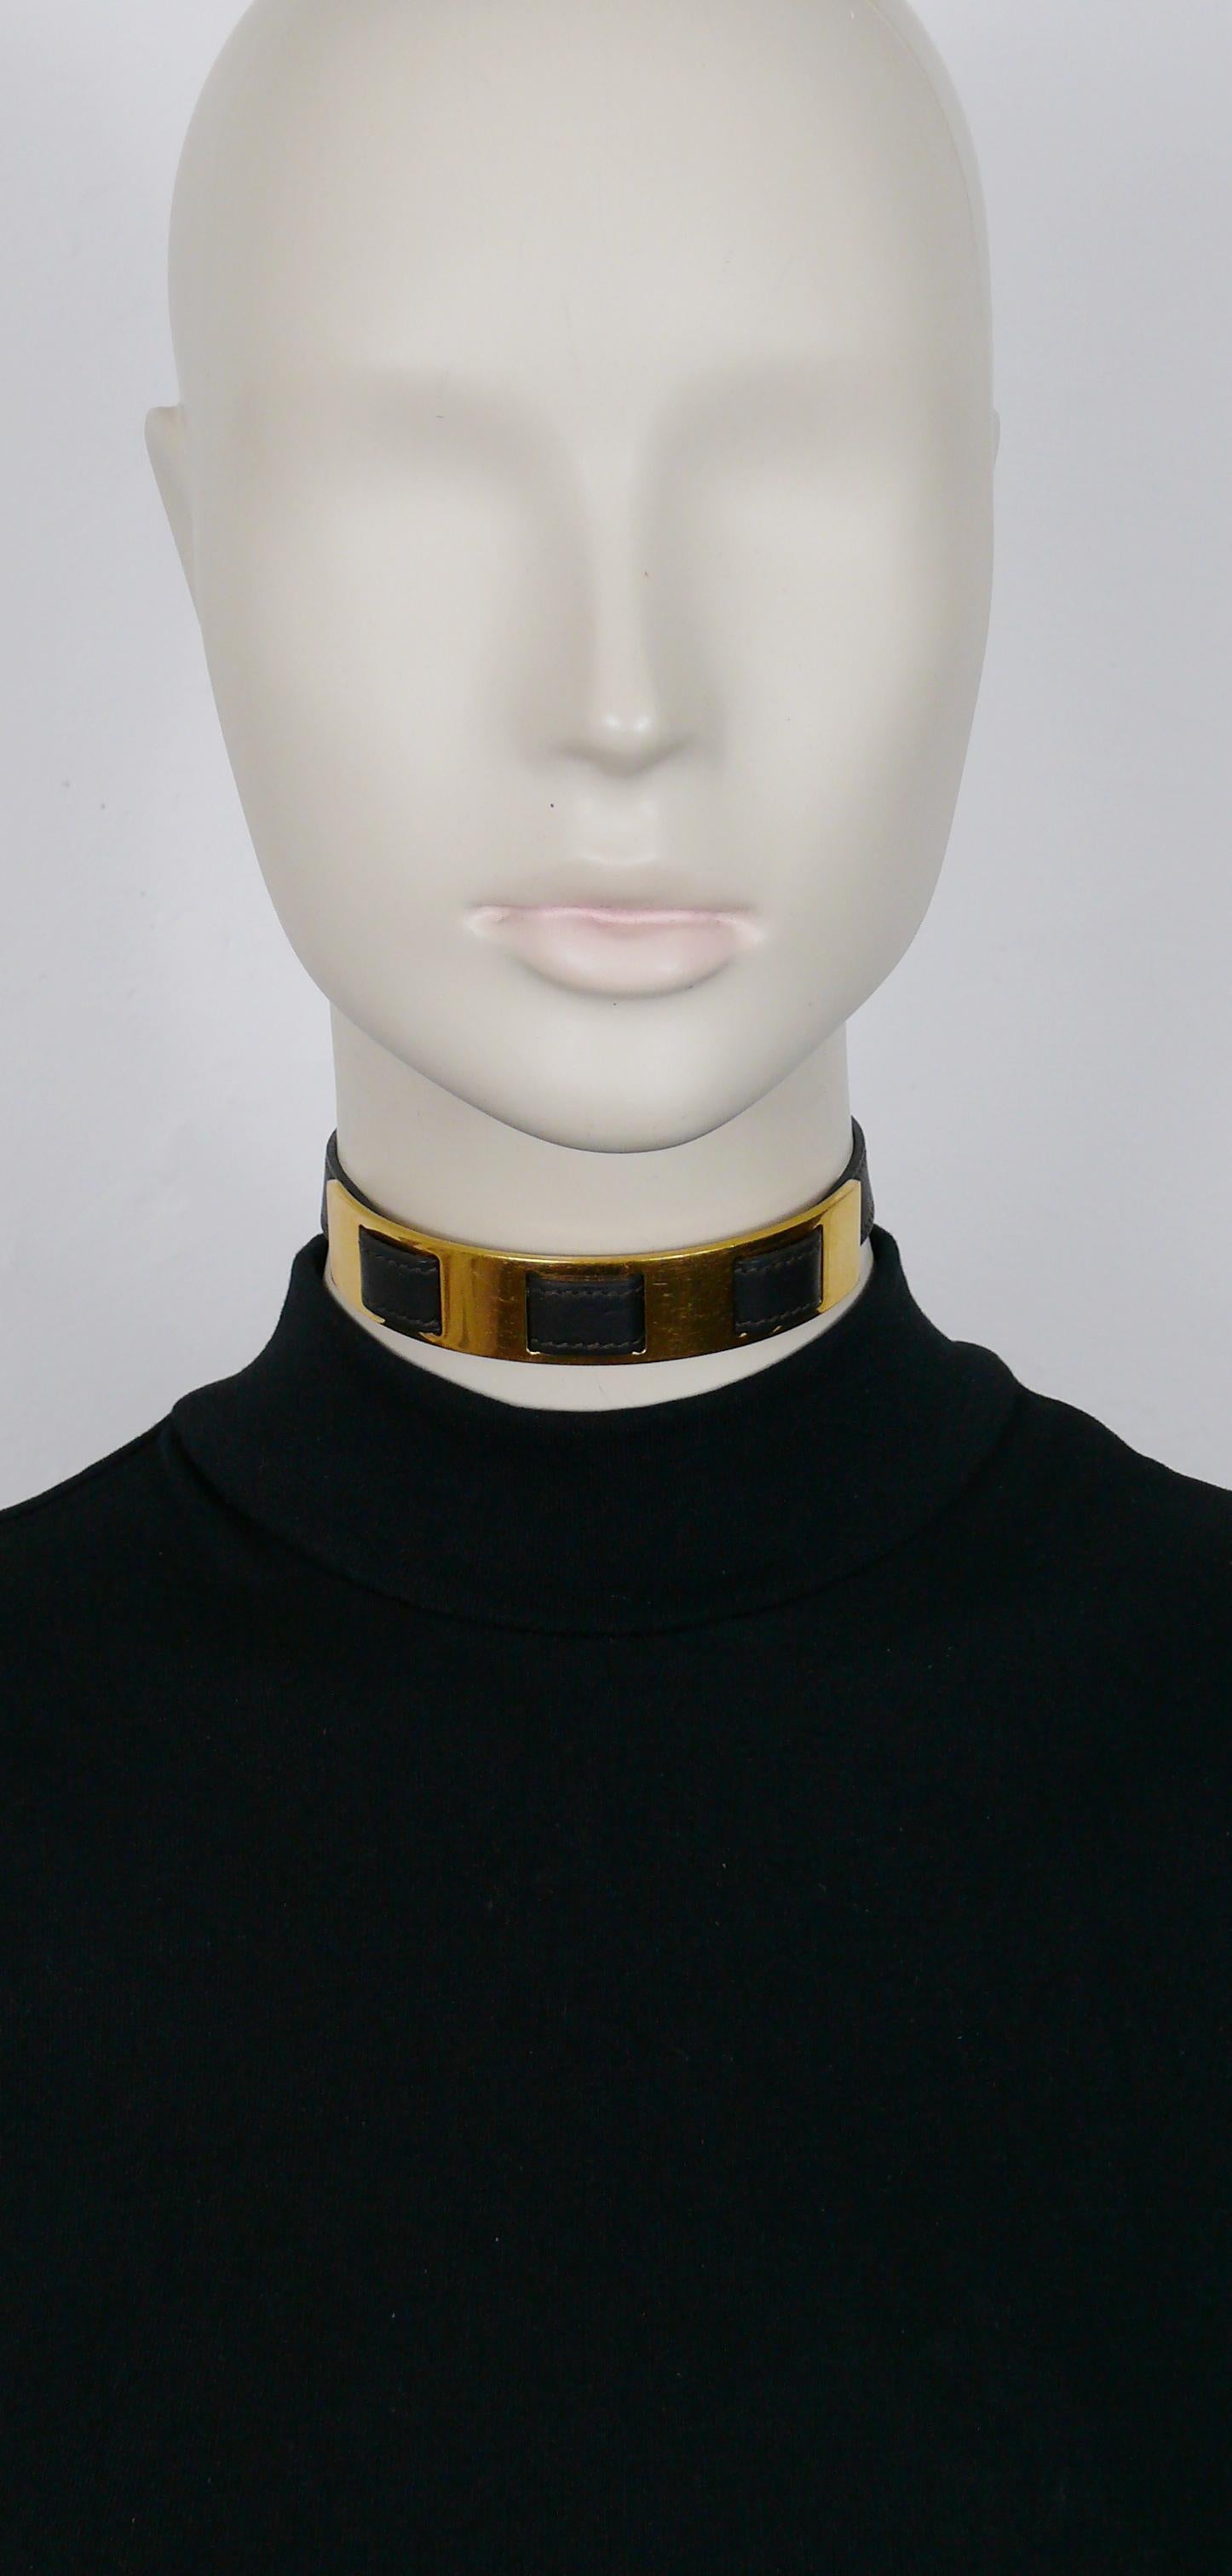 HERMES vintage choker necklace made of dark brown leather with golde tone panel.

CLOU DE SELLE snap button closure.

Embossed HERMES on the reverse of the gold panel.
Marked HERMES PARIS Made in France on the reverse of the leather.
Letter date B